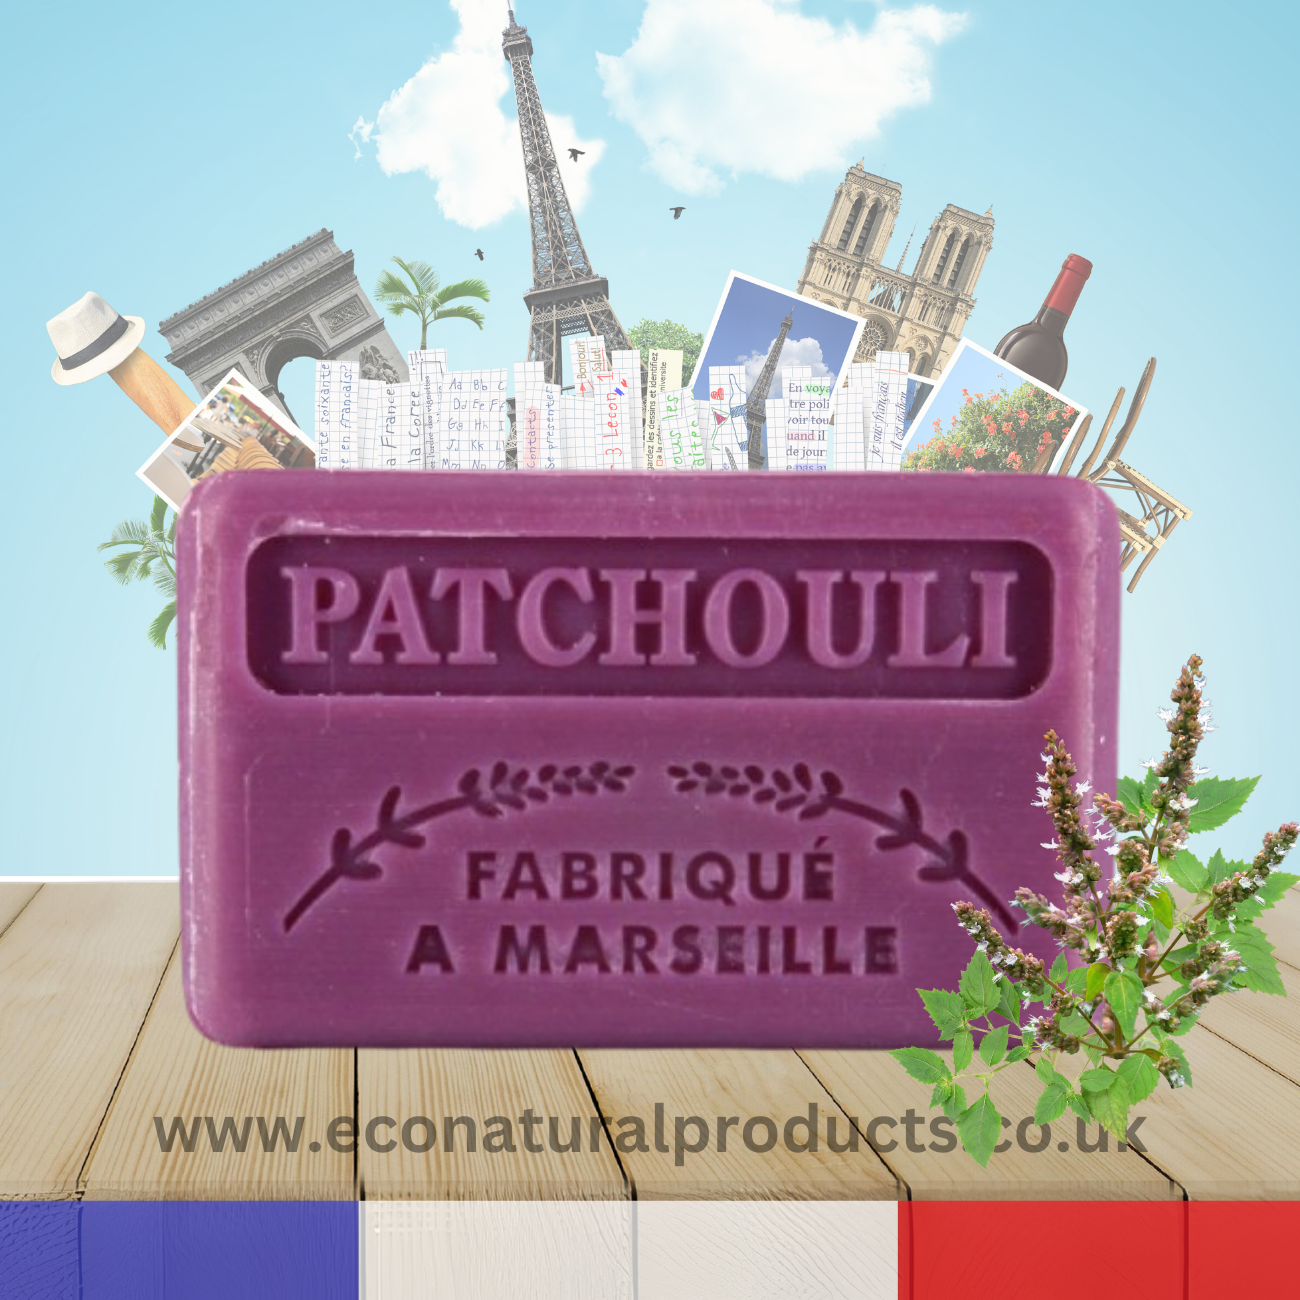 French Marseille Soap Patchouli 60g